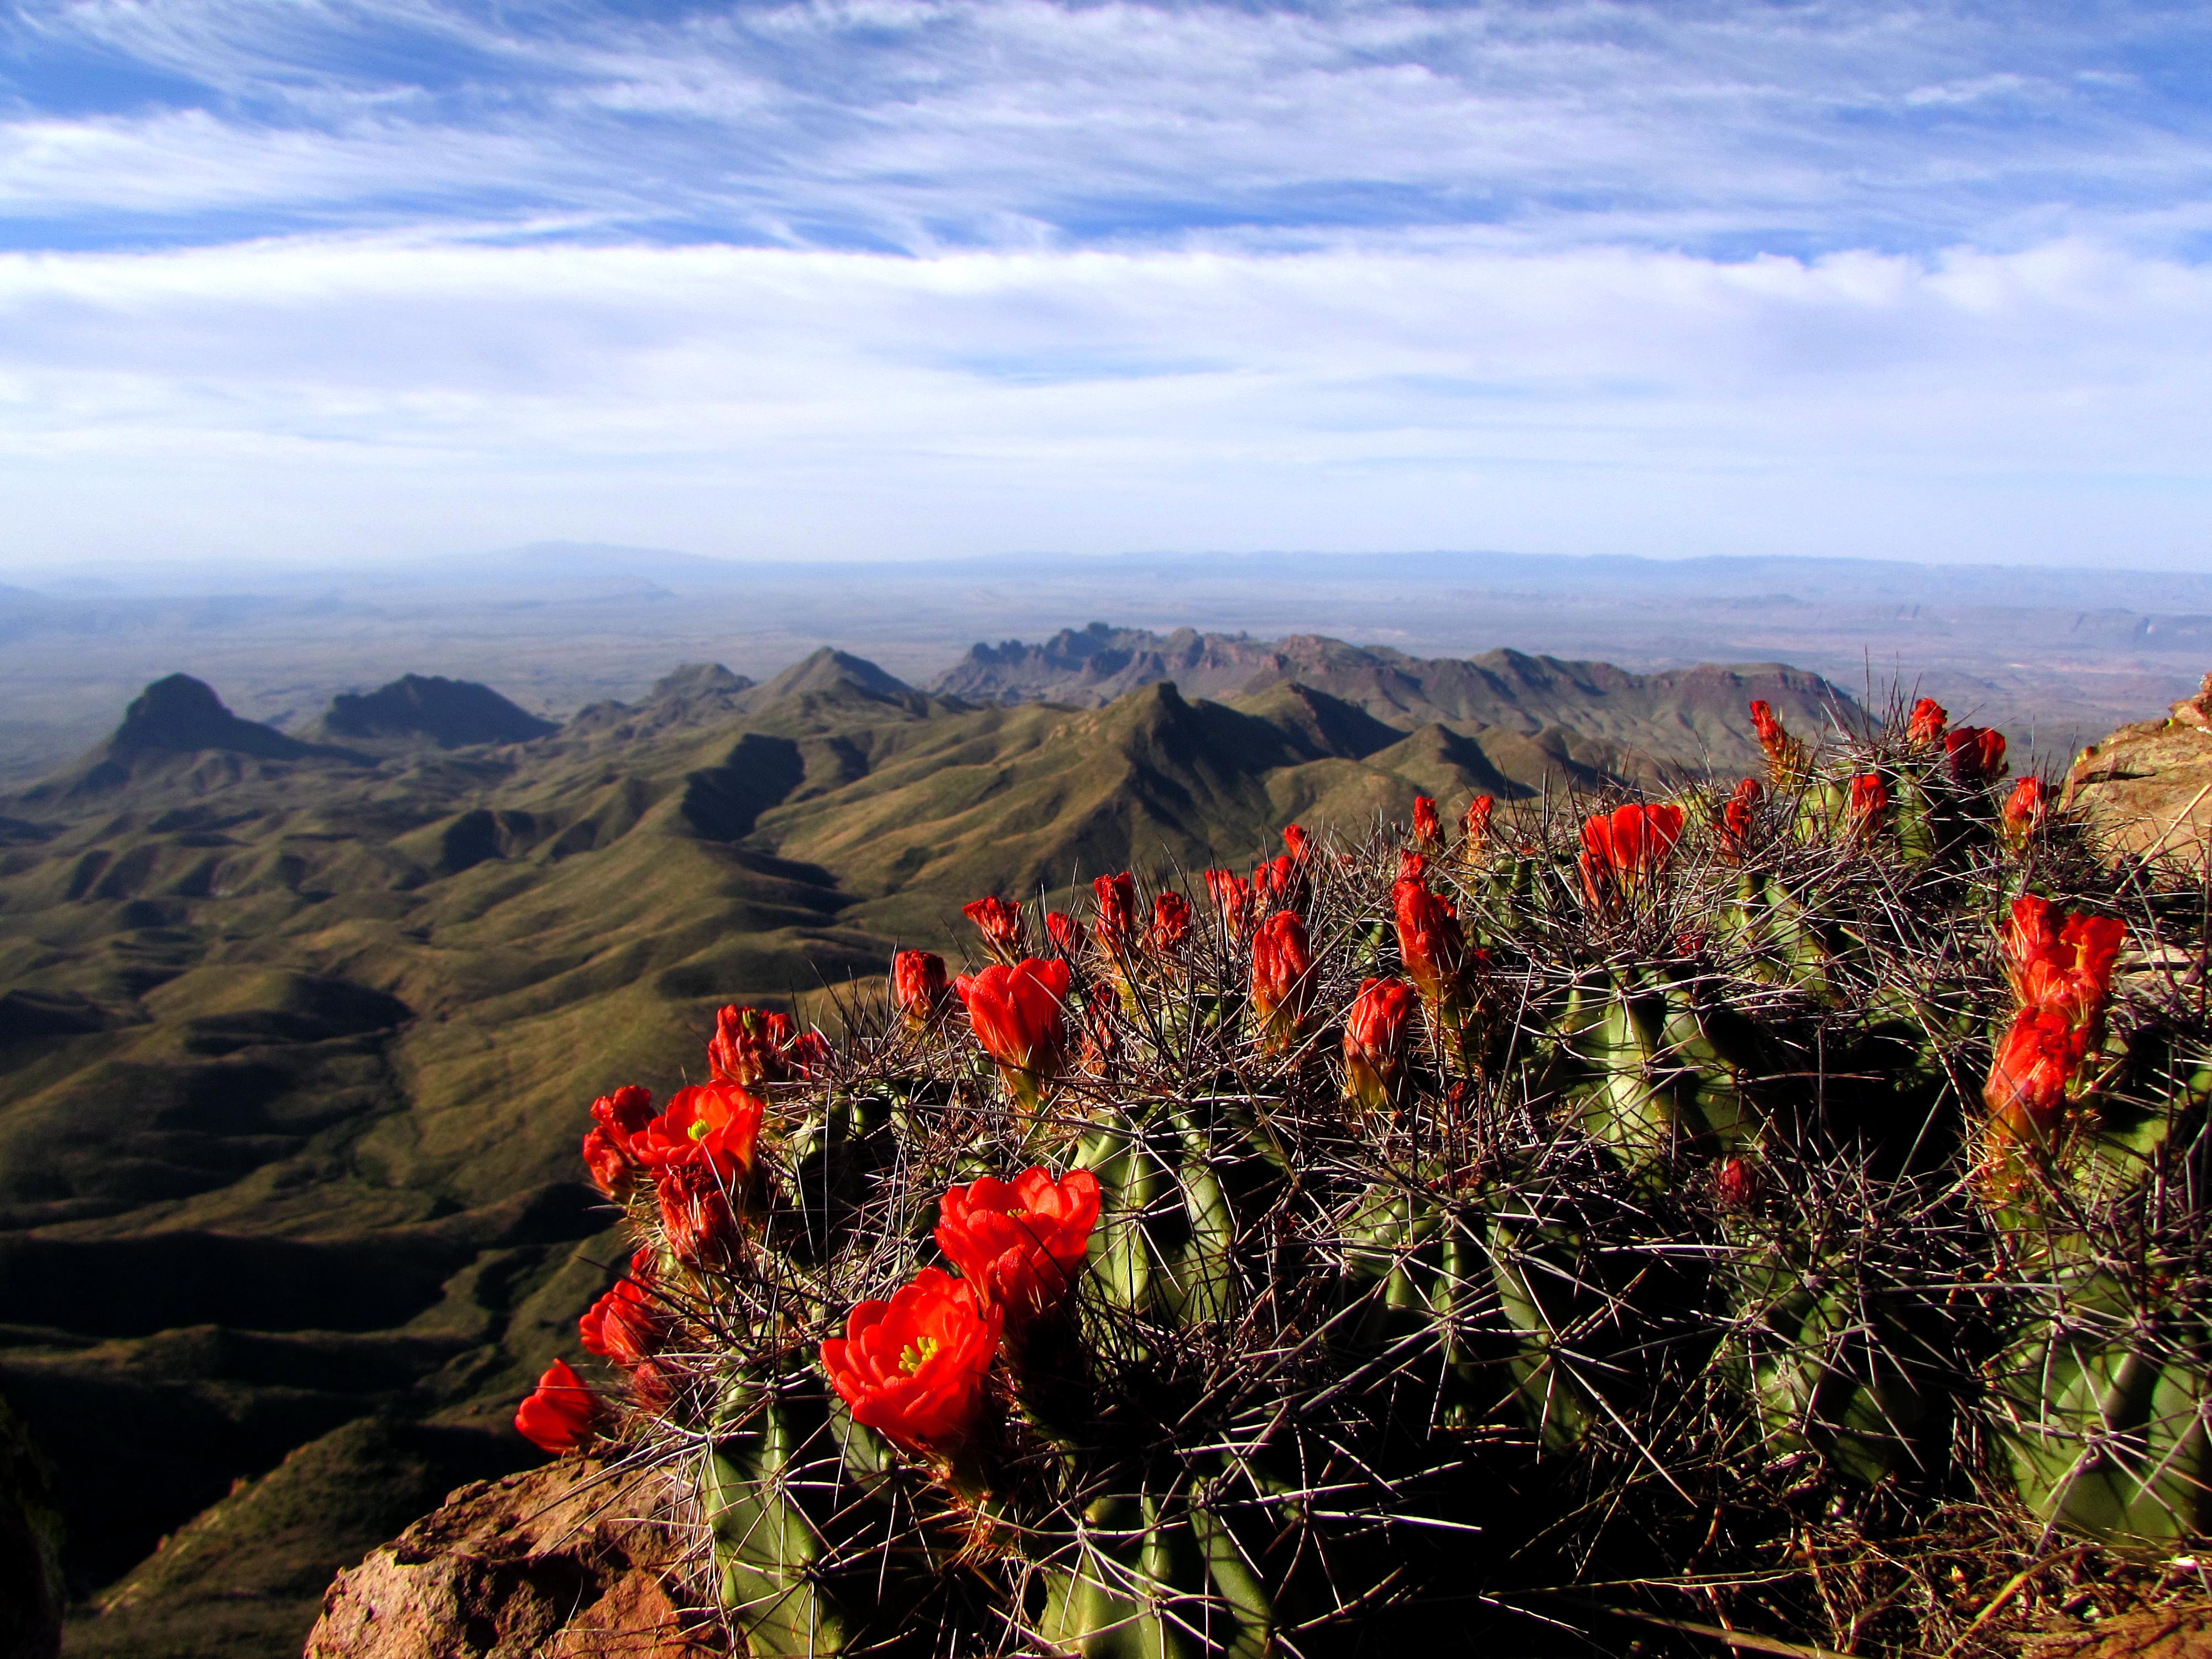 View from the South Rim of the Chisos